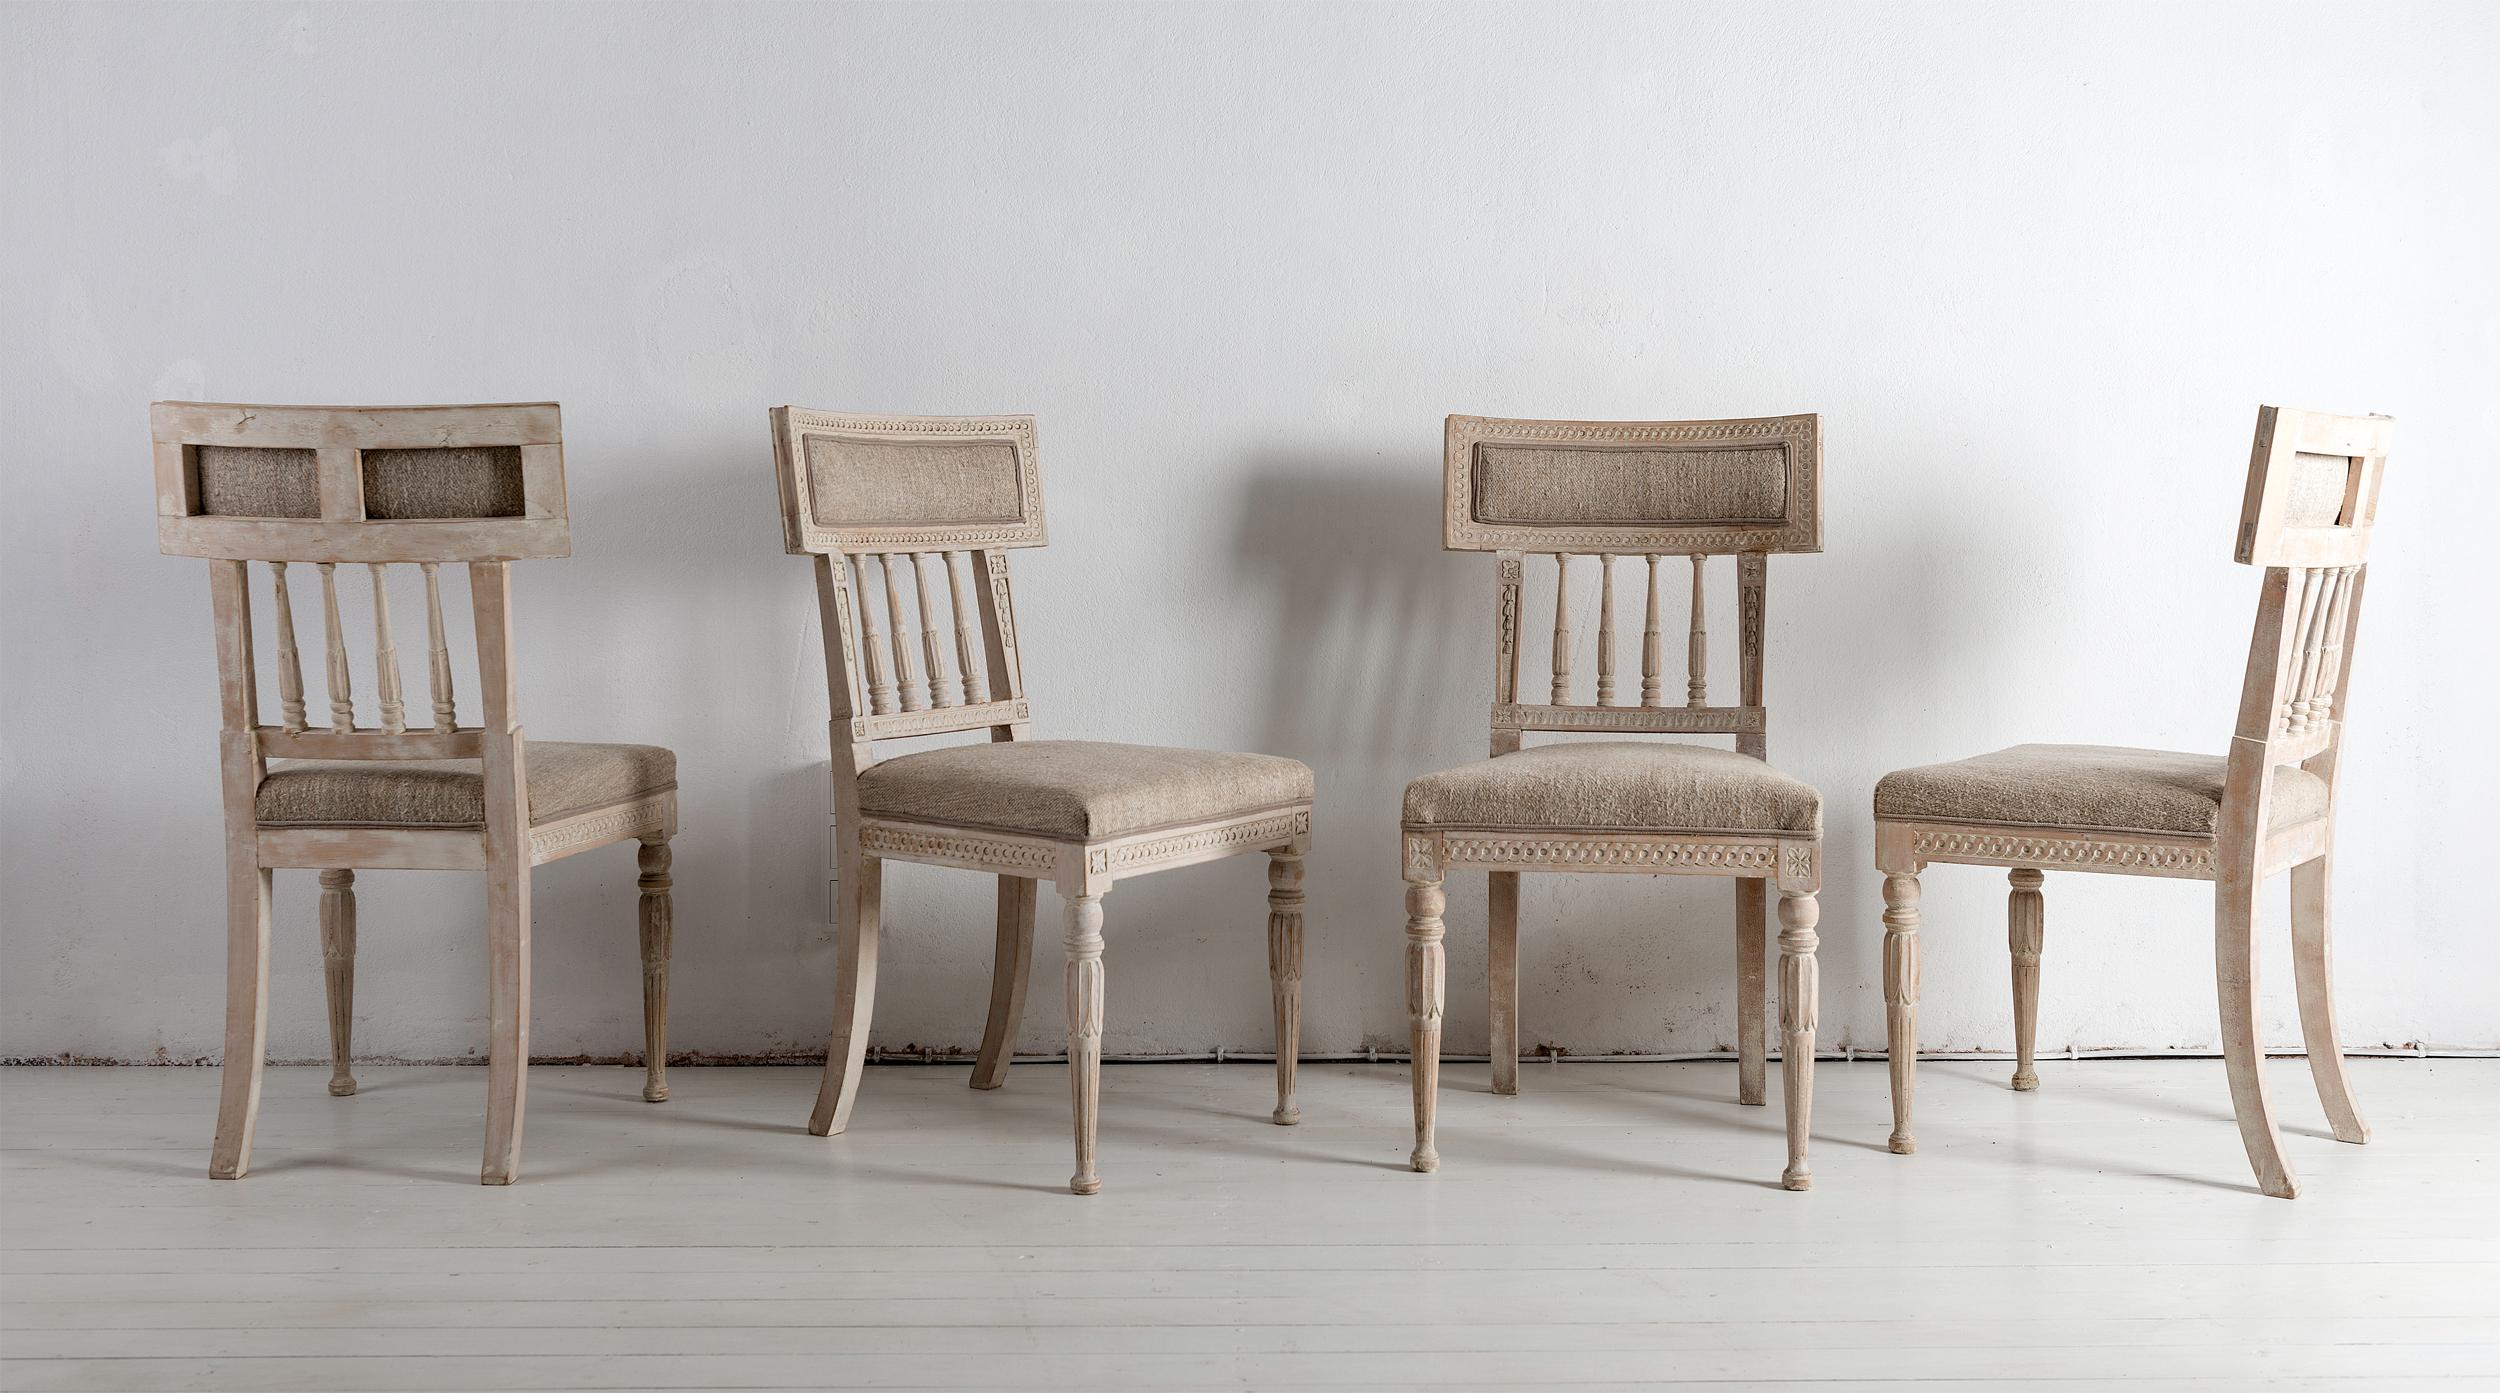 A set of Gustavian dining chairs, 19th century. Very elegant design.